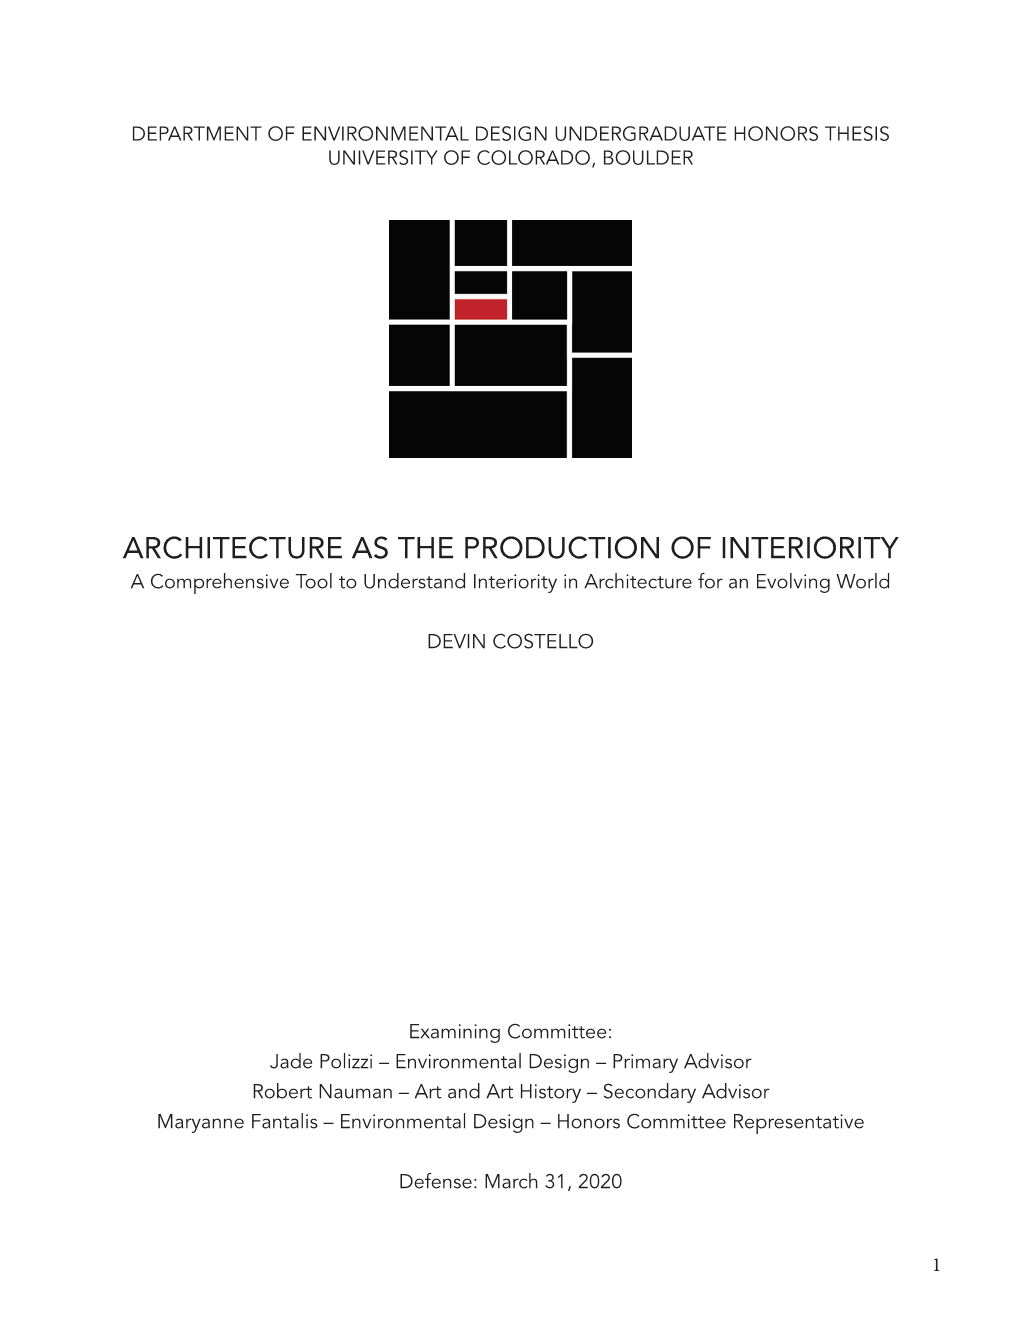 ARCHITECTURE AS the PRODUCTION of INTERIORITY a Comprehensive Tool to Understand Interiority in Architecture for an Evolving World